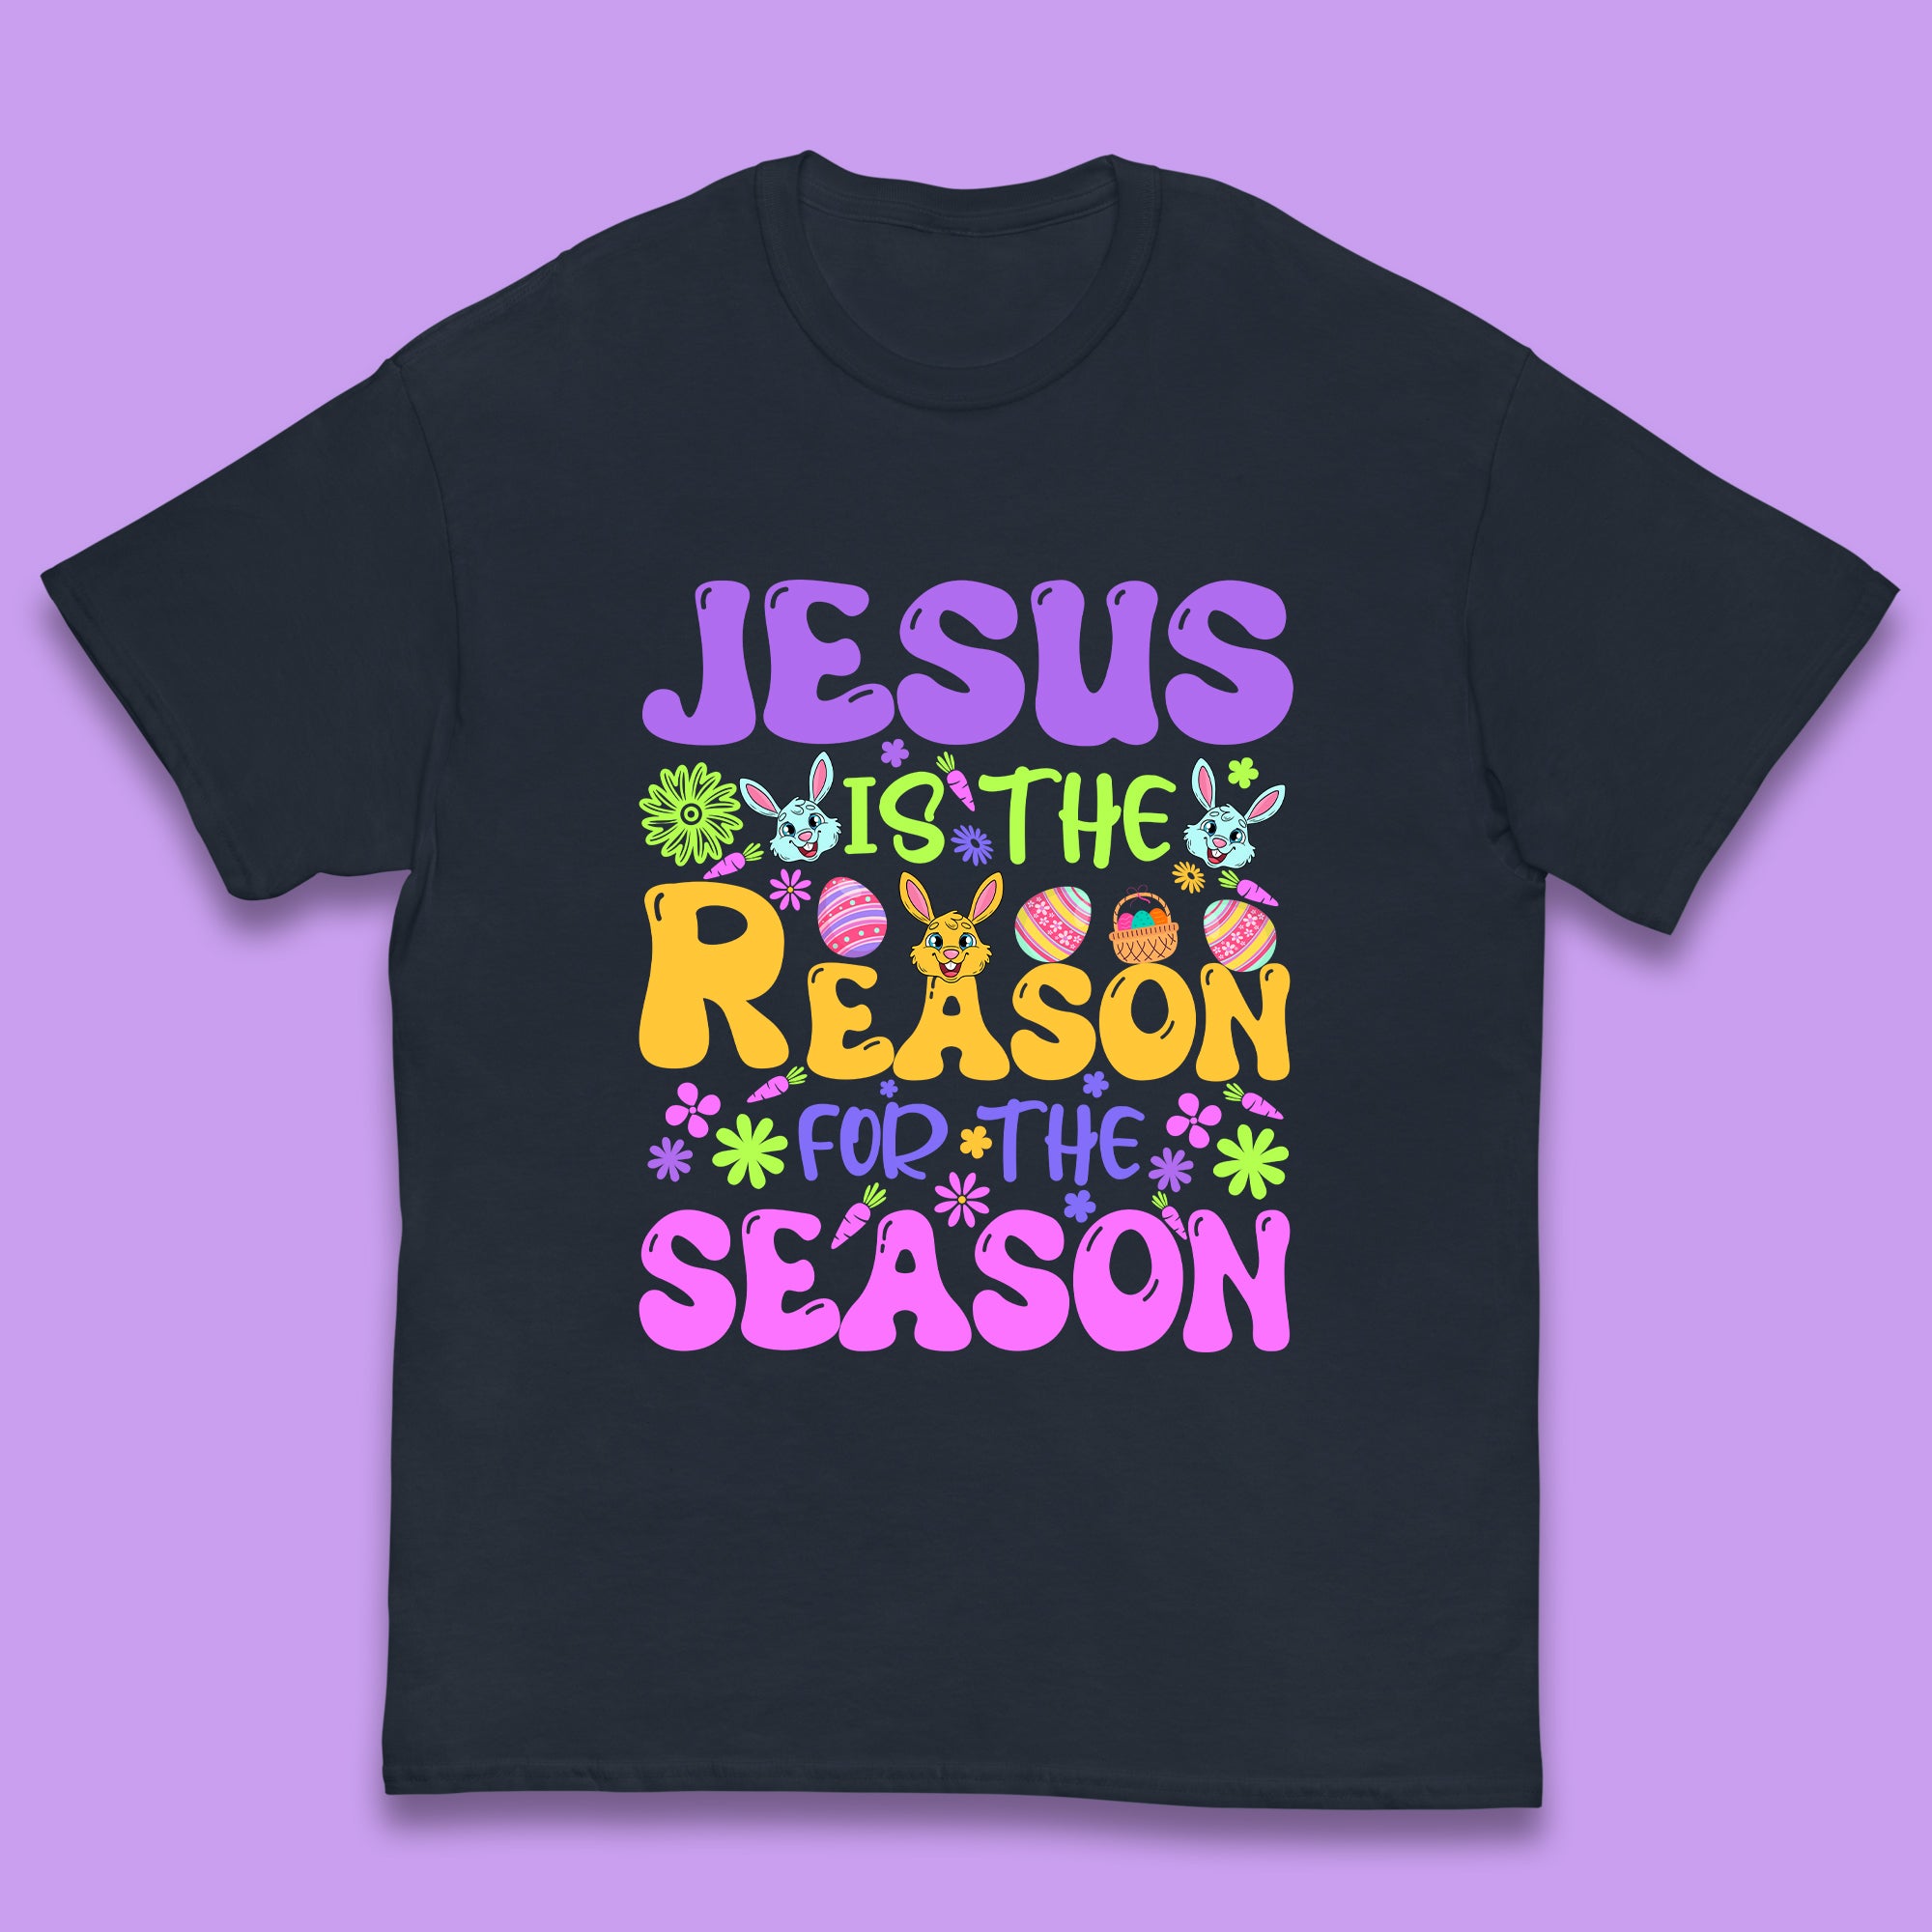 Jesus Is The Reason For The Season Kids T-Shirt